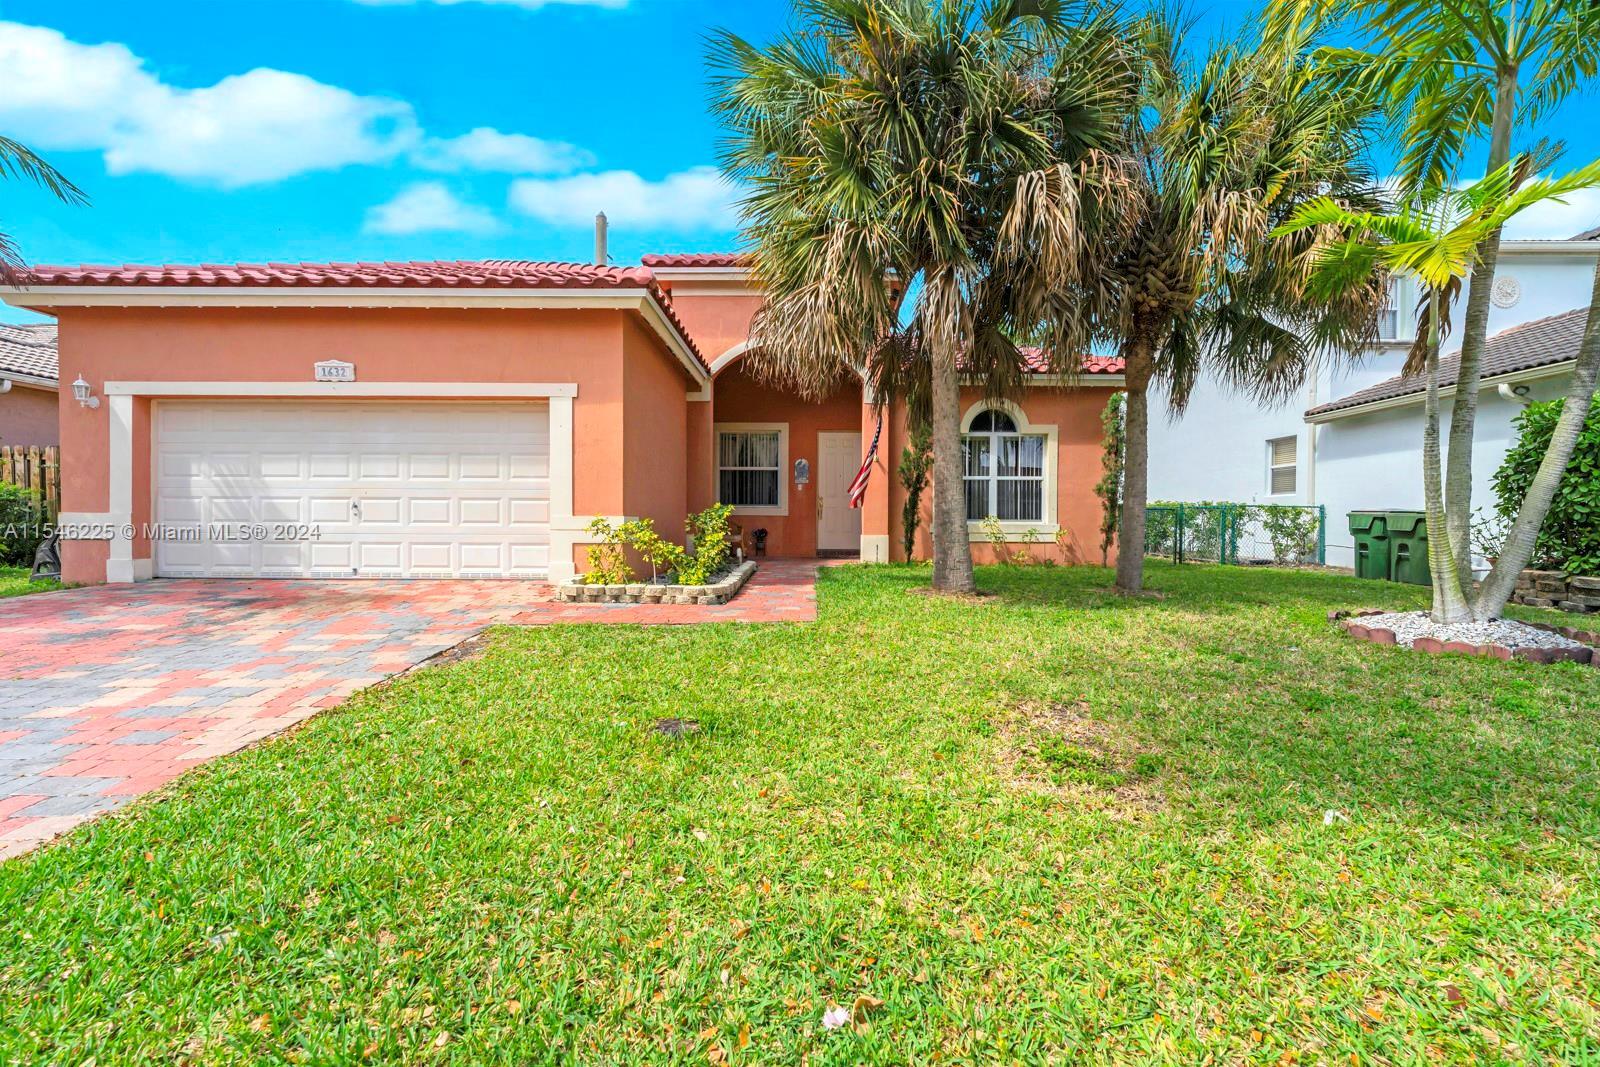 Photo of 1632 SE 16th Ave in Homestead, FL